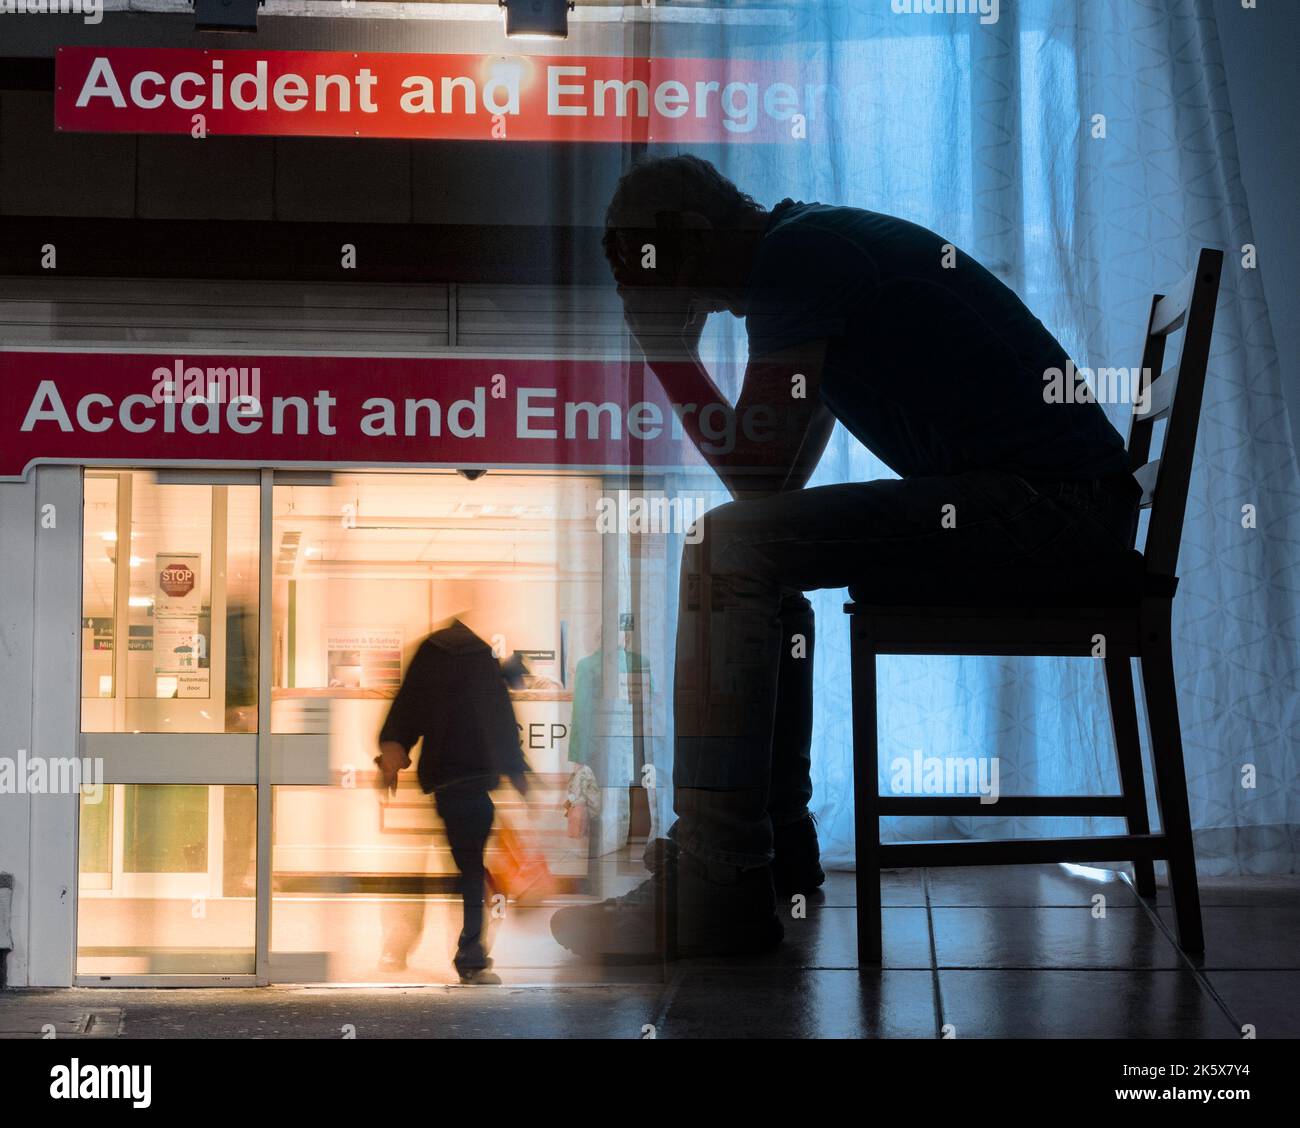 NHS hospital Accident and Emergency entrance with image of man with head in hands. Overworked Doctor, stress, mental health, Doctors... Concept. Stock Photo